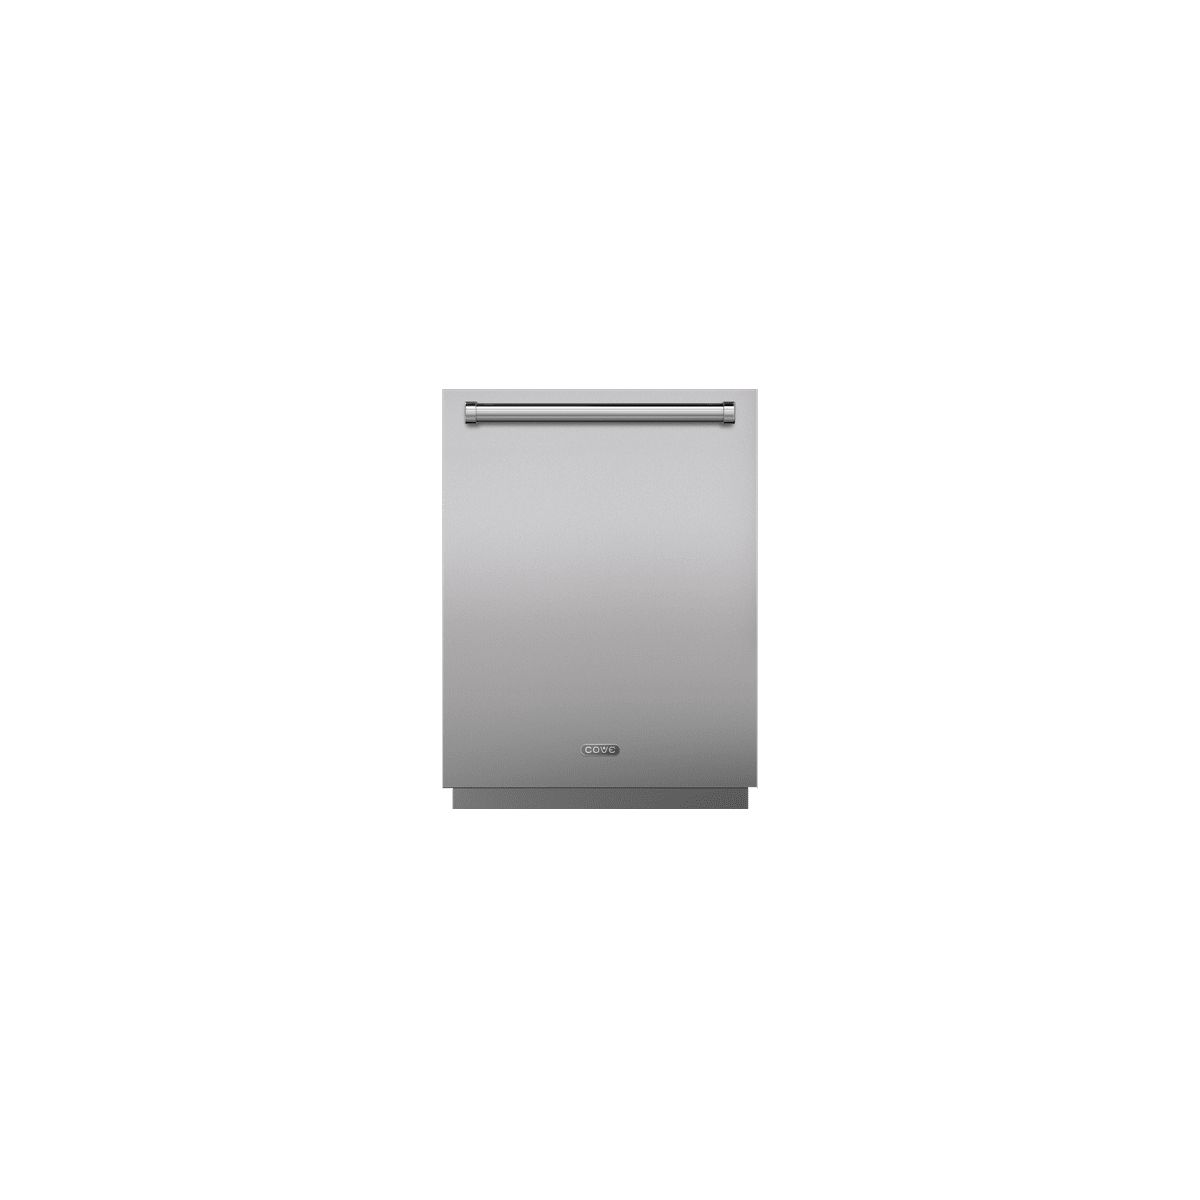 24 Inch Wide Built-In Fully Integrated Dishwasher | Build.com, Inc.